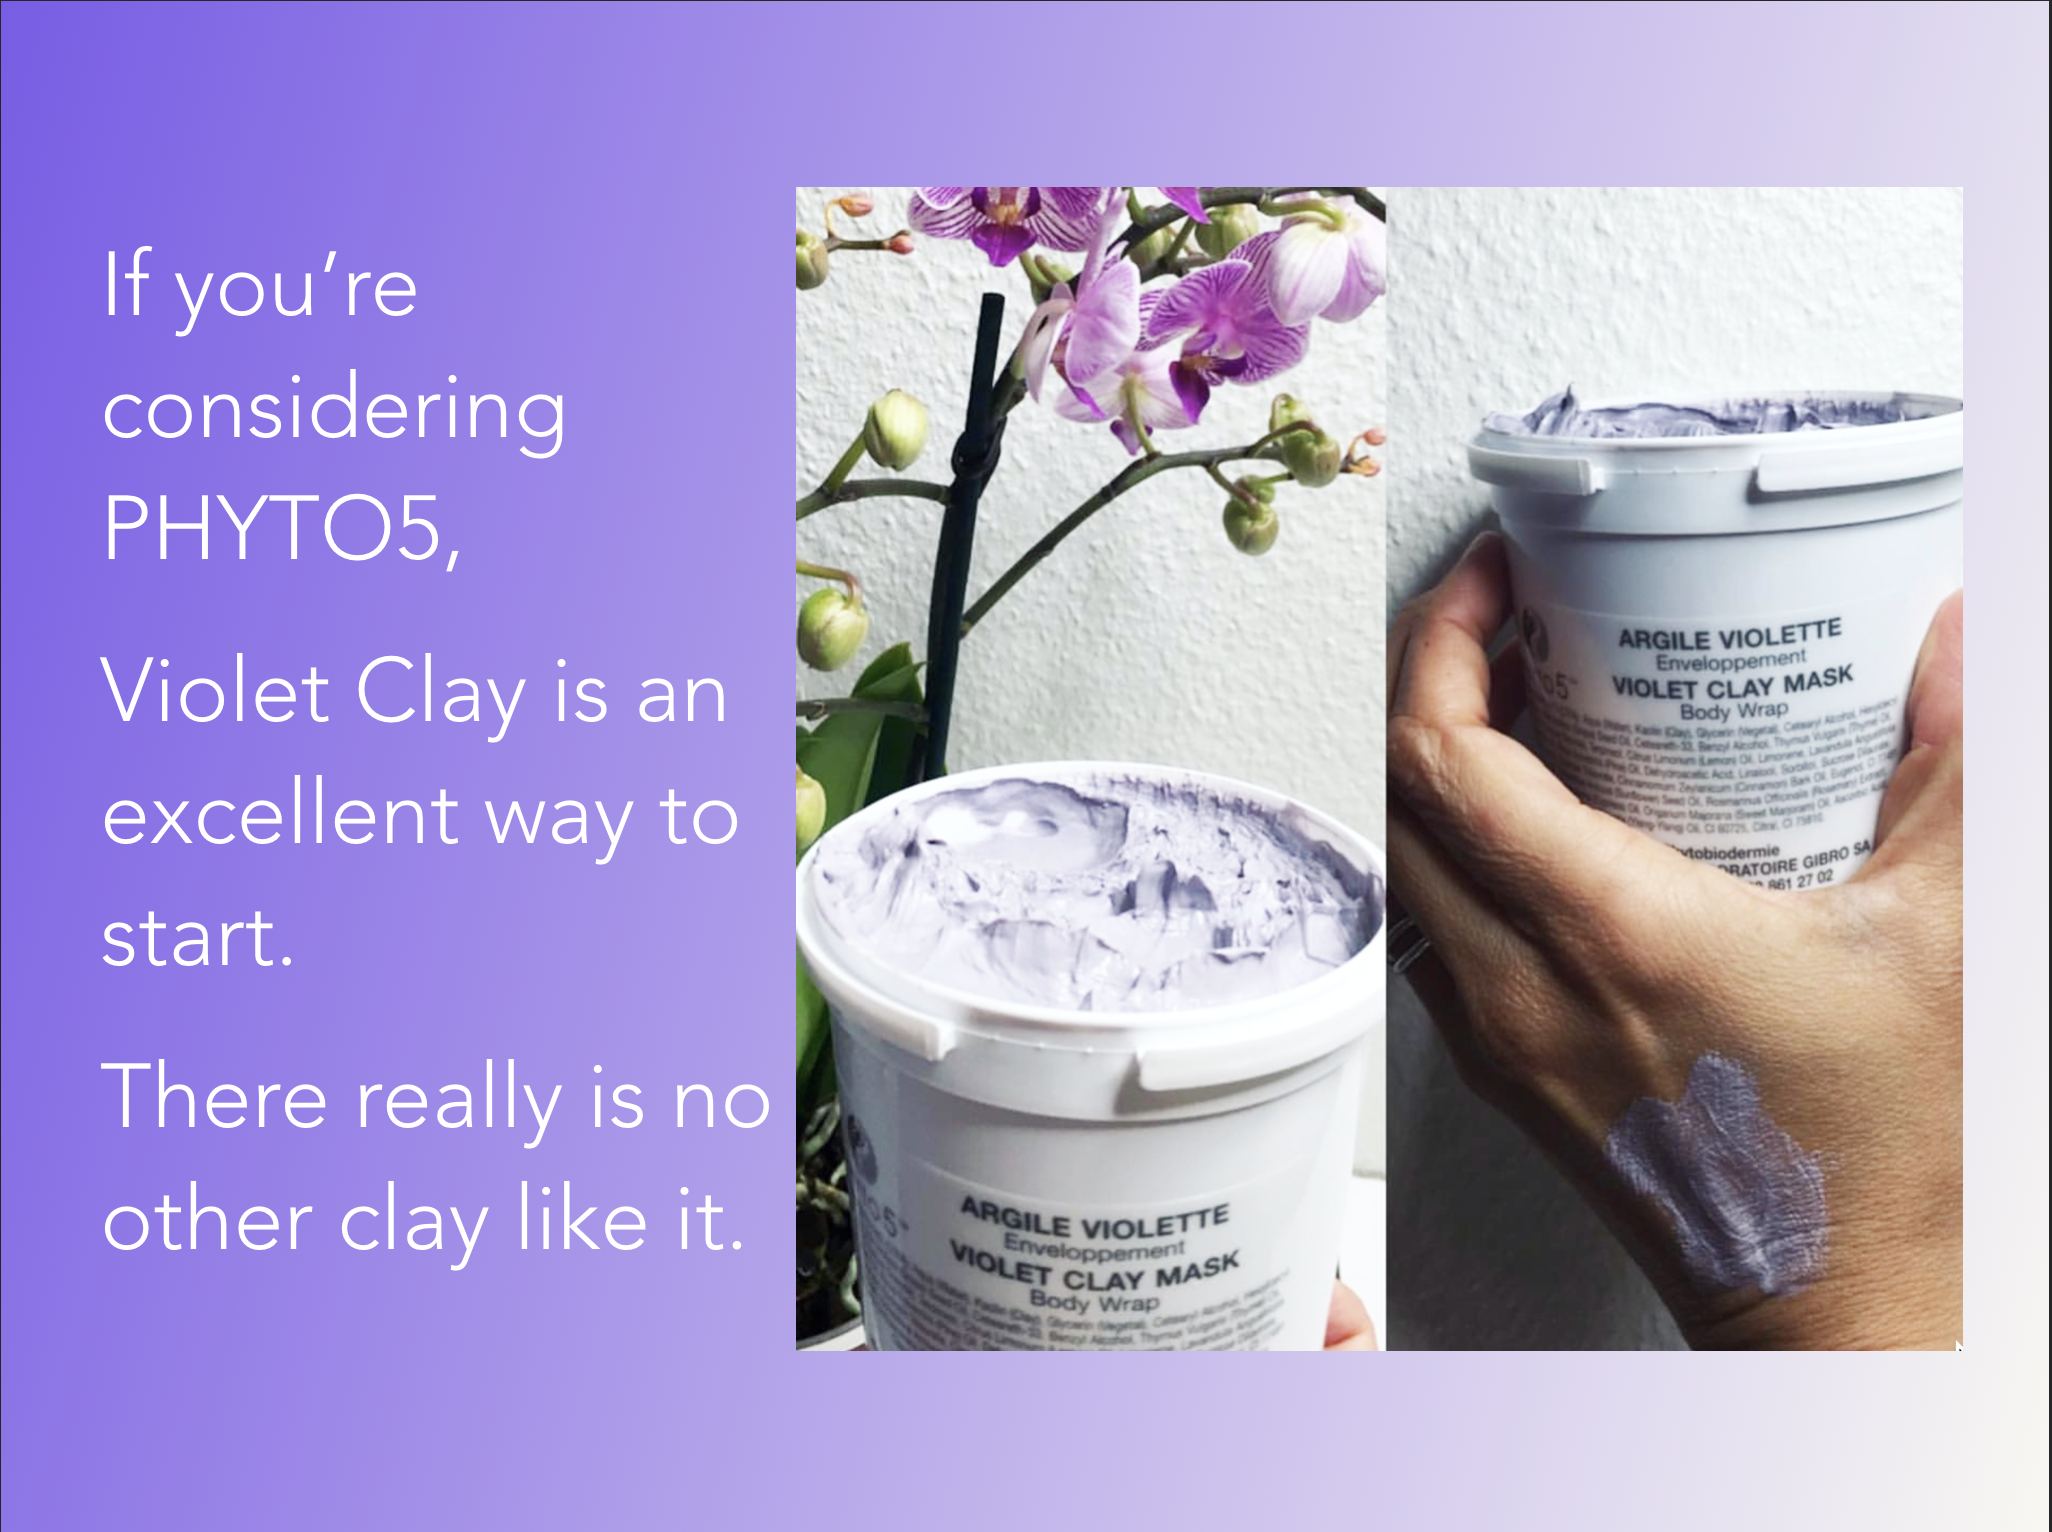 violet-clay-excellent-way-to-start.png